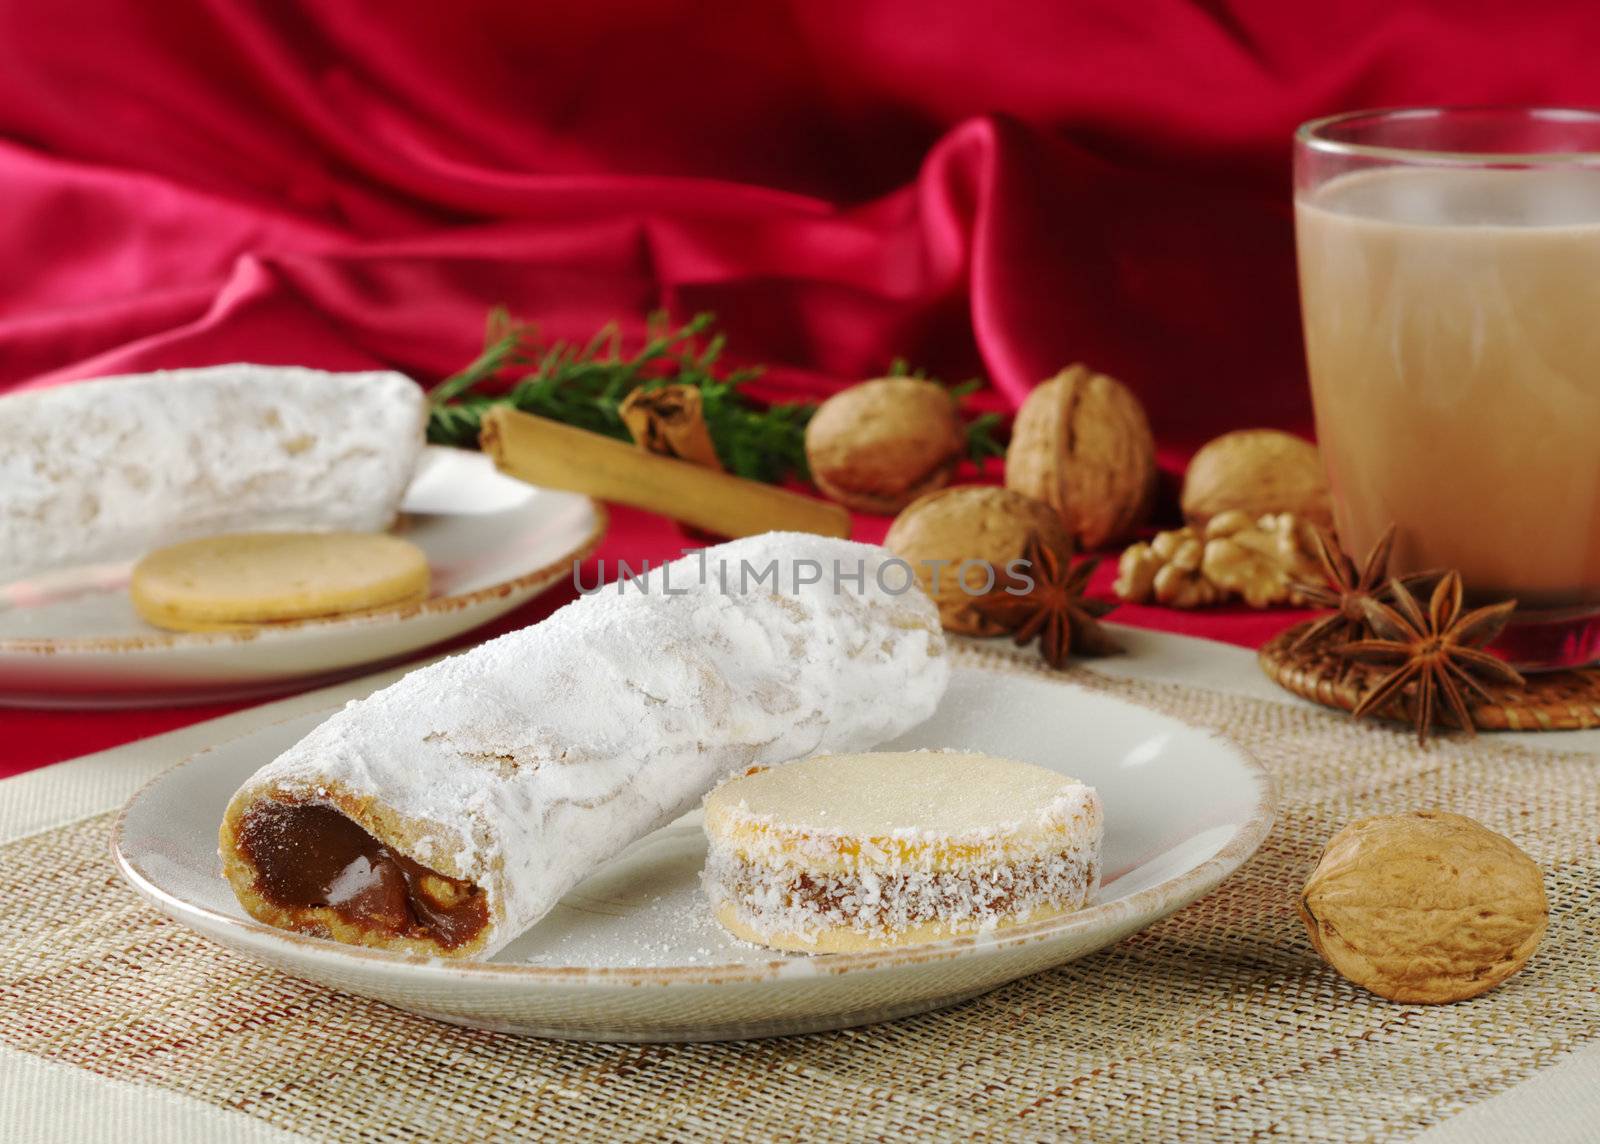 Peruvian cakes filled with a caramel-like cream called Manjar: the long one is called Guarguero, the round one is called Alfajor (Selective Focus, Focus on the front of the two cakes)